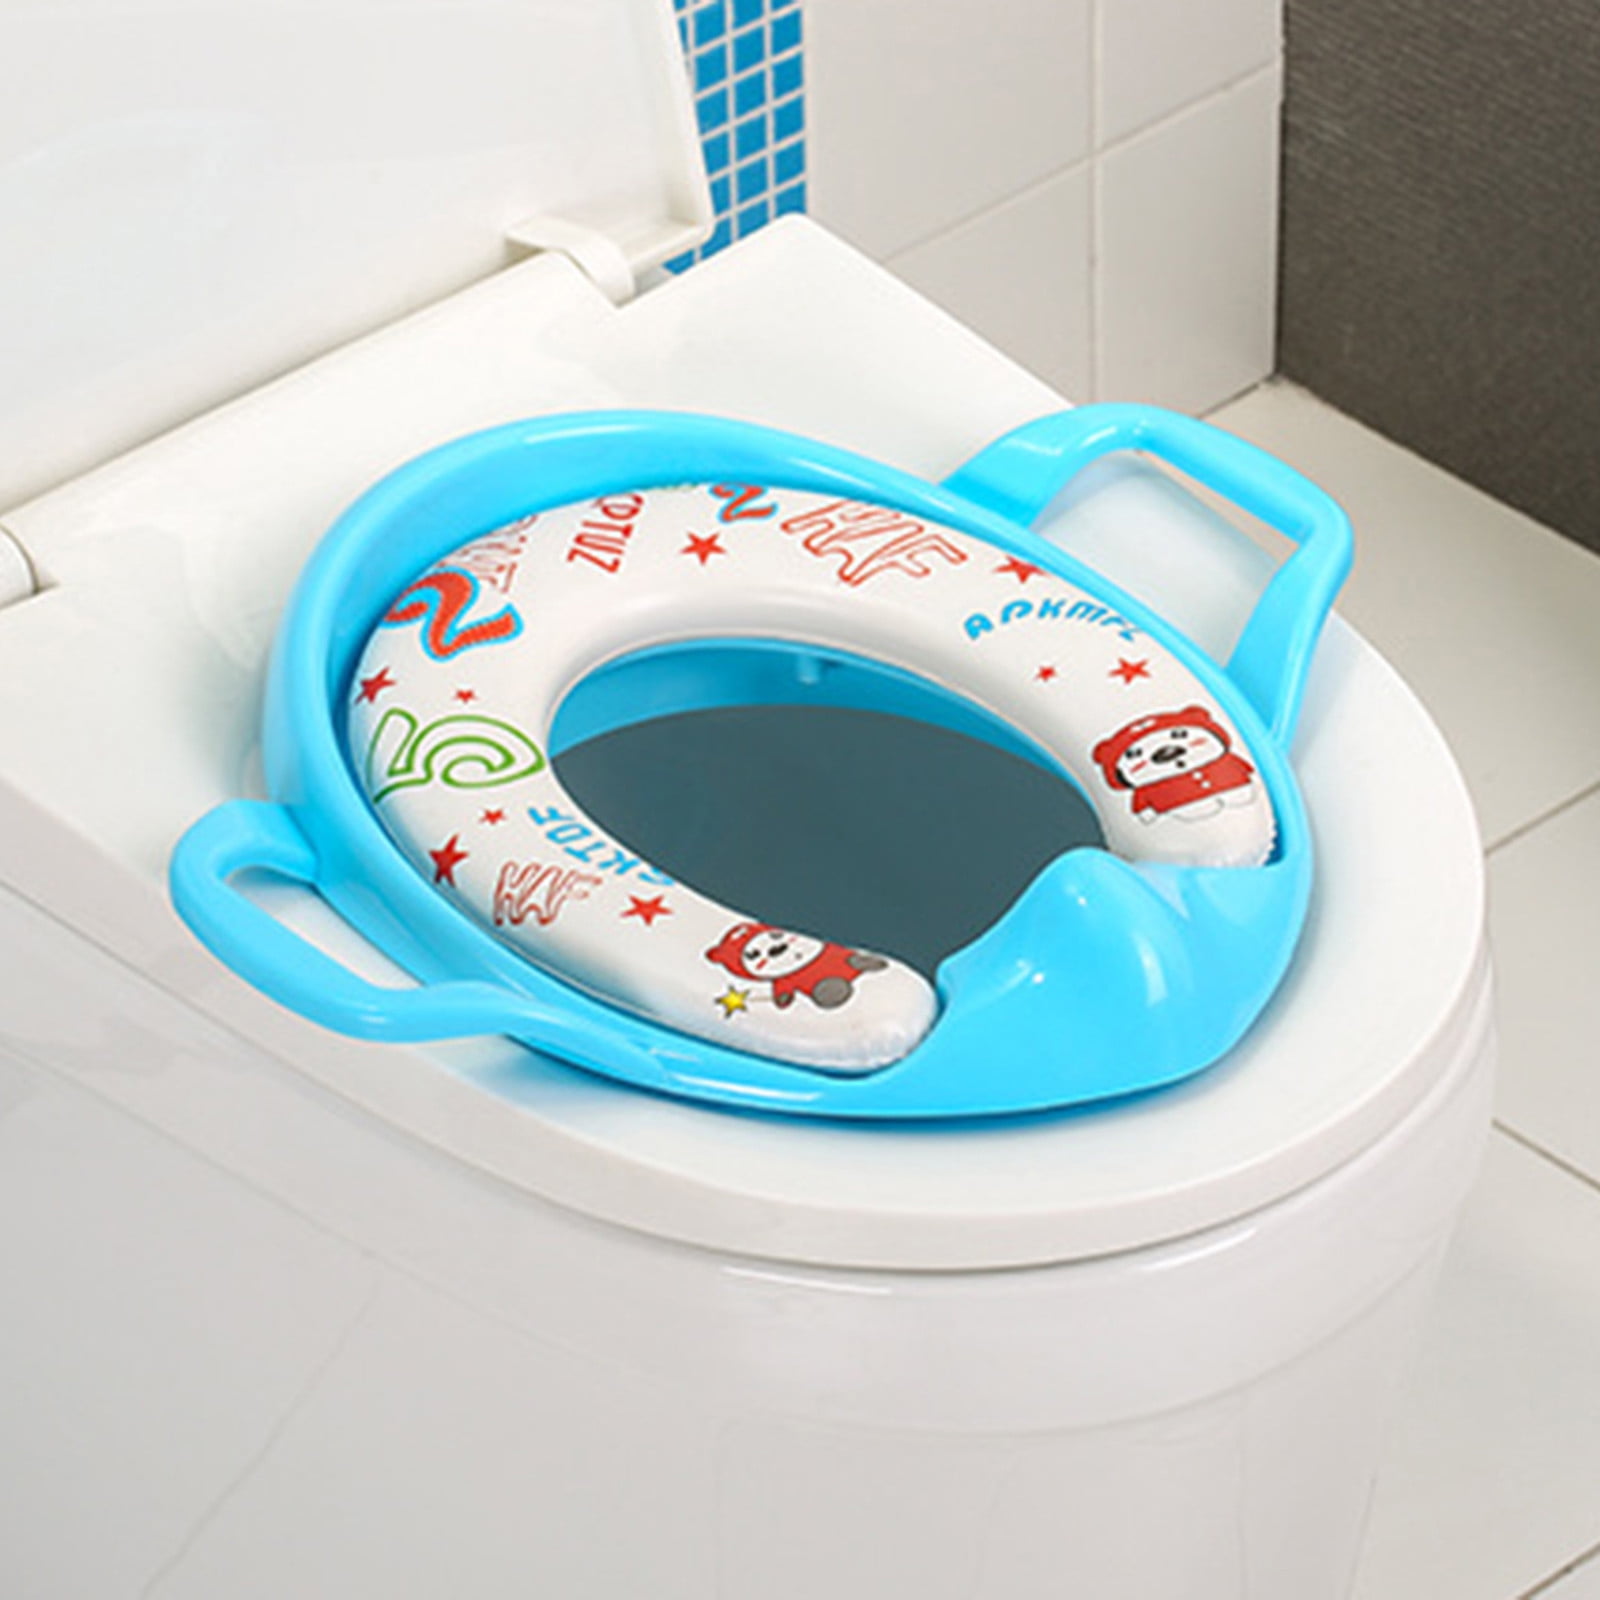 QIIBURR Potty Training Seat for Toilet Kids Potty Seat for Toilet Potty  Training Seat for Kids Boy Girl Toilet Seat with Cushion Handle Backrest  Kids